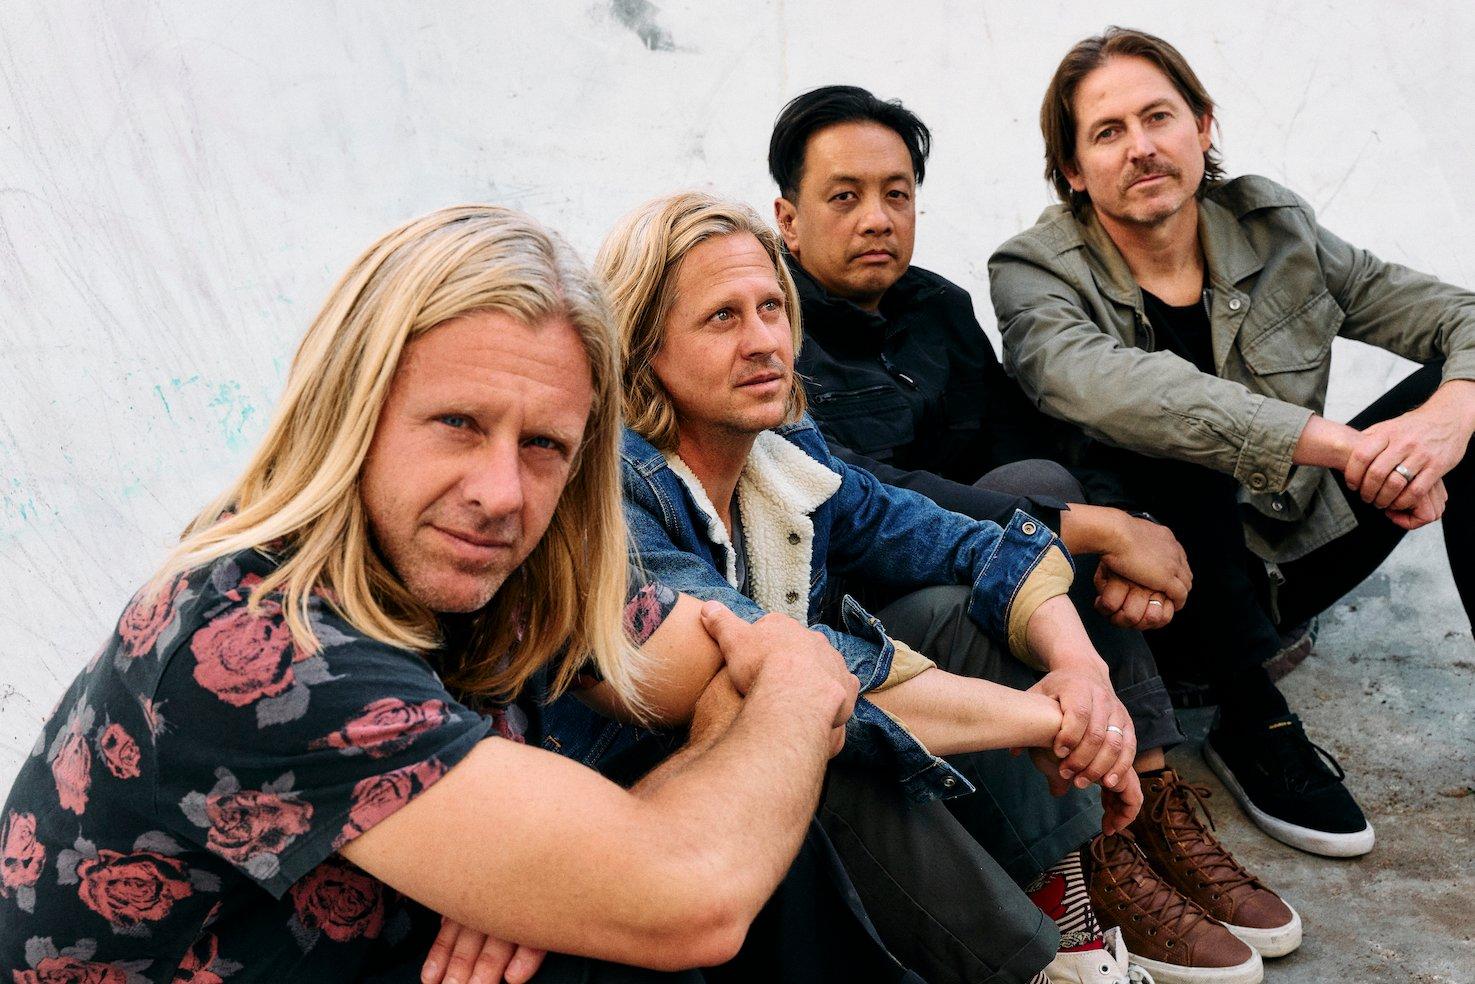 How Switchfoot Reimagined 'The Beautiful Letdown': Ryan Tedder, Owl City,  Ingrid Andress & More Detail Their Covers For The Deluxe Edition